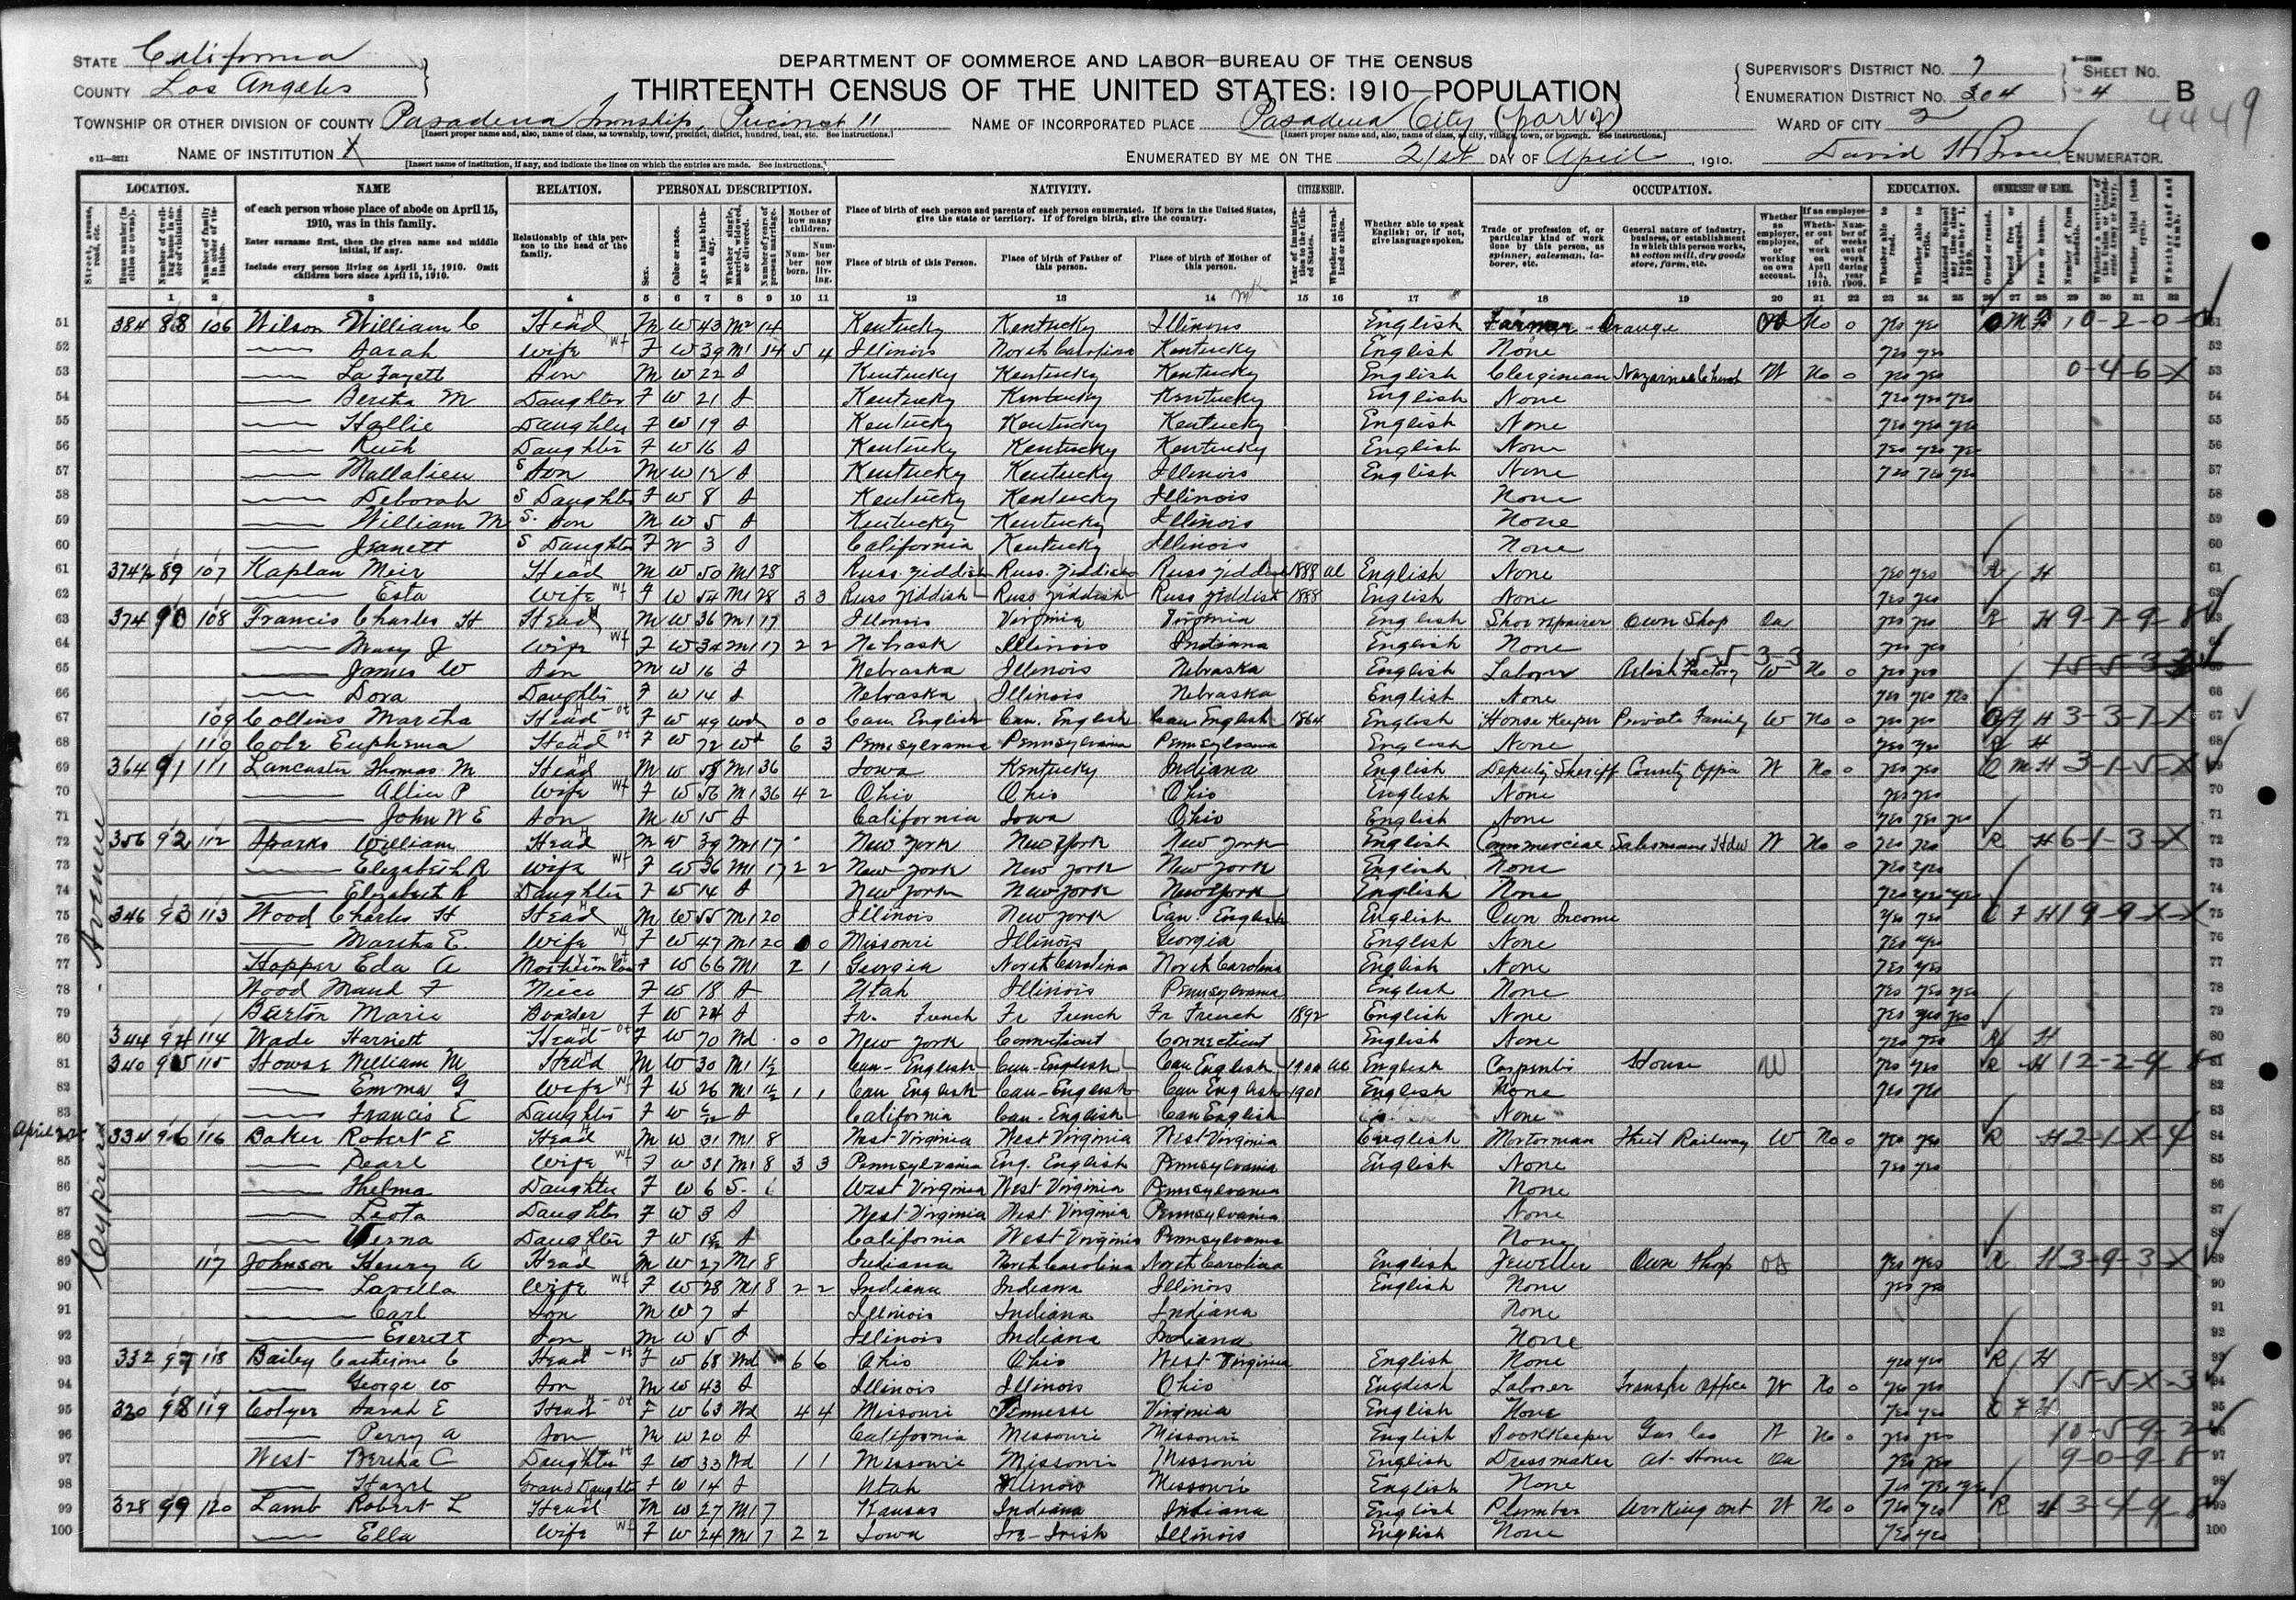  U.S. Census 1910, Pasadena Township, Calif.   Bob’s paternal grandparents, Mary Jane Silver, 34, and Charles Howe Francis, 36; his father, James William (Jim), 16 (born Dec. 4, 1893), and his aunt, Dora May, 14. Listed on lines 63-66.  Charles born 